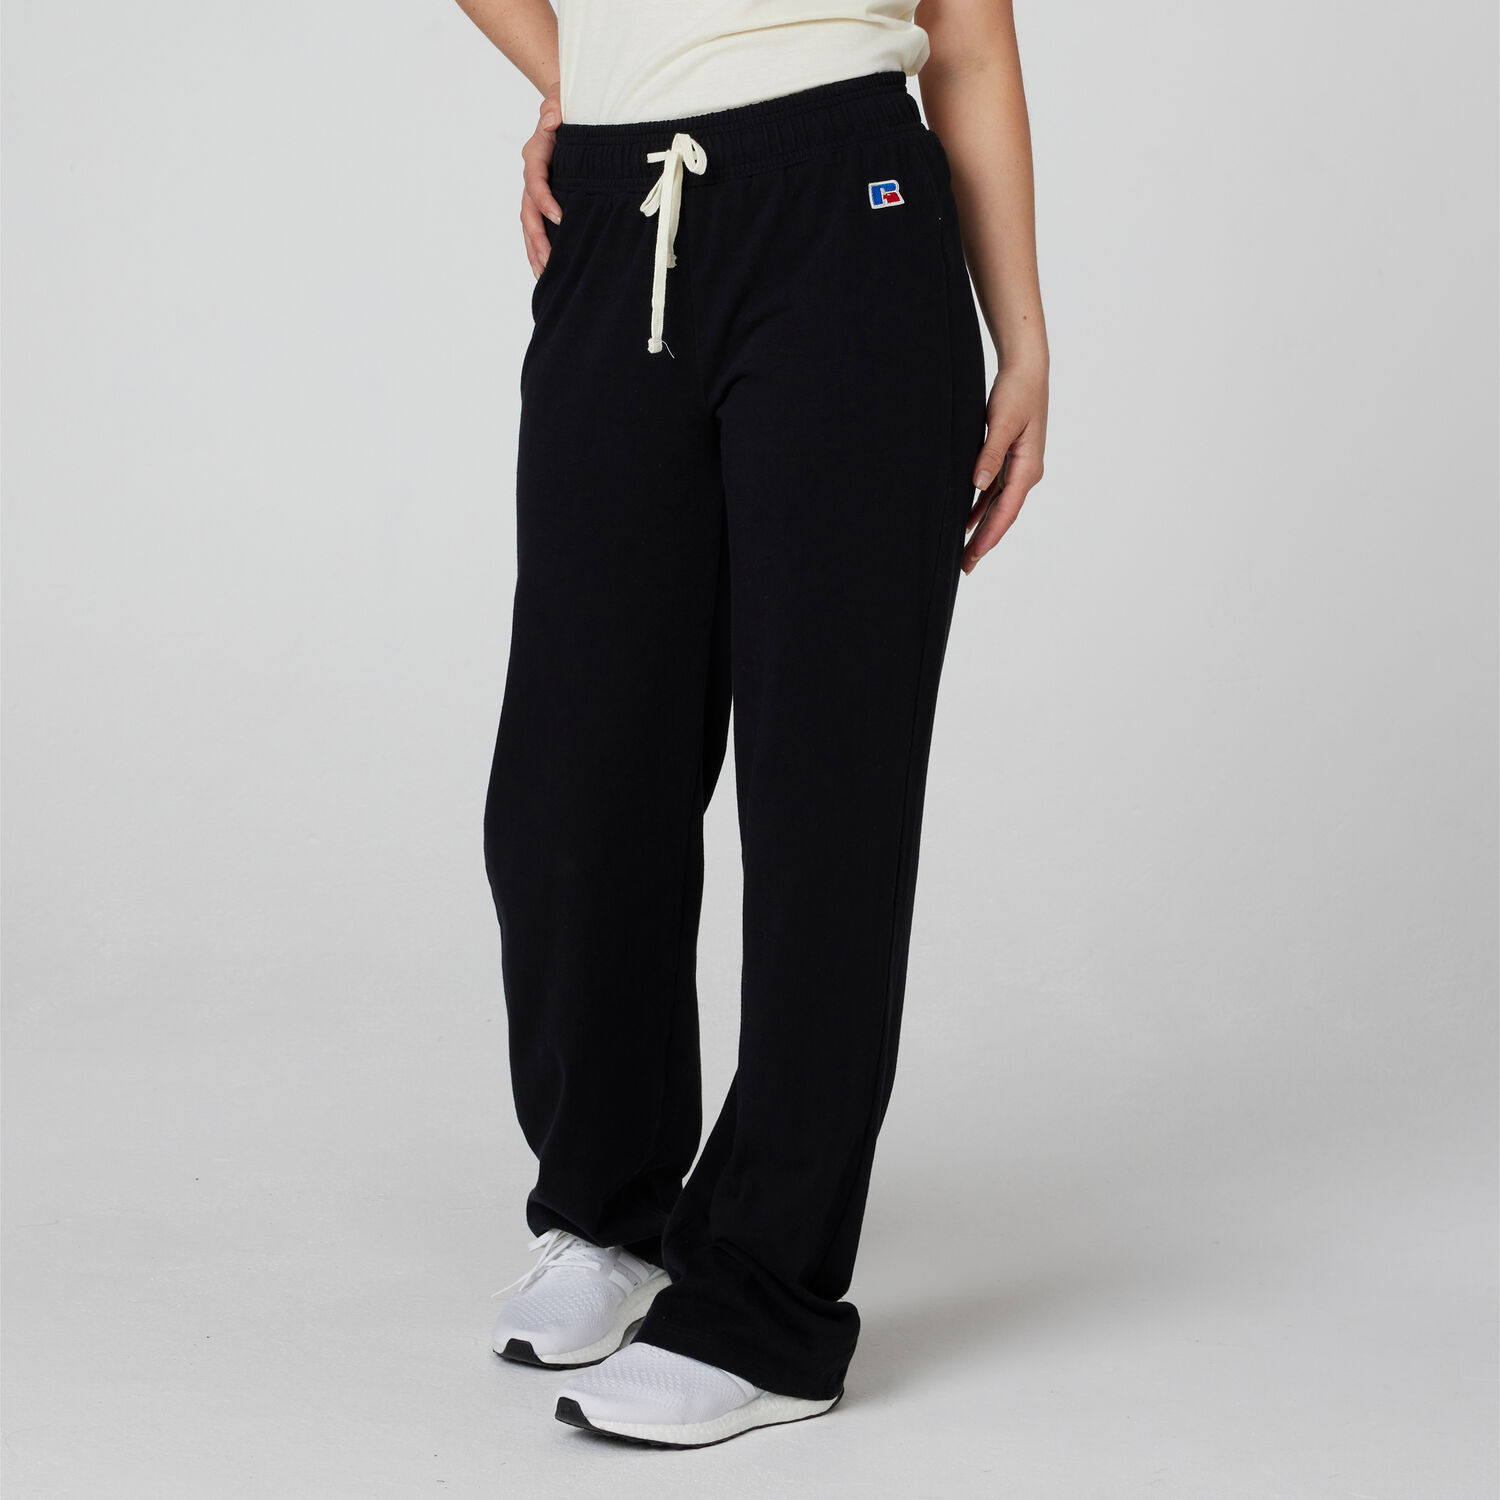 Russell Athletic Women's Wide-Leg Cotton Pant l Russell Athletic.com